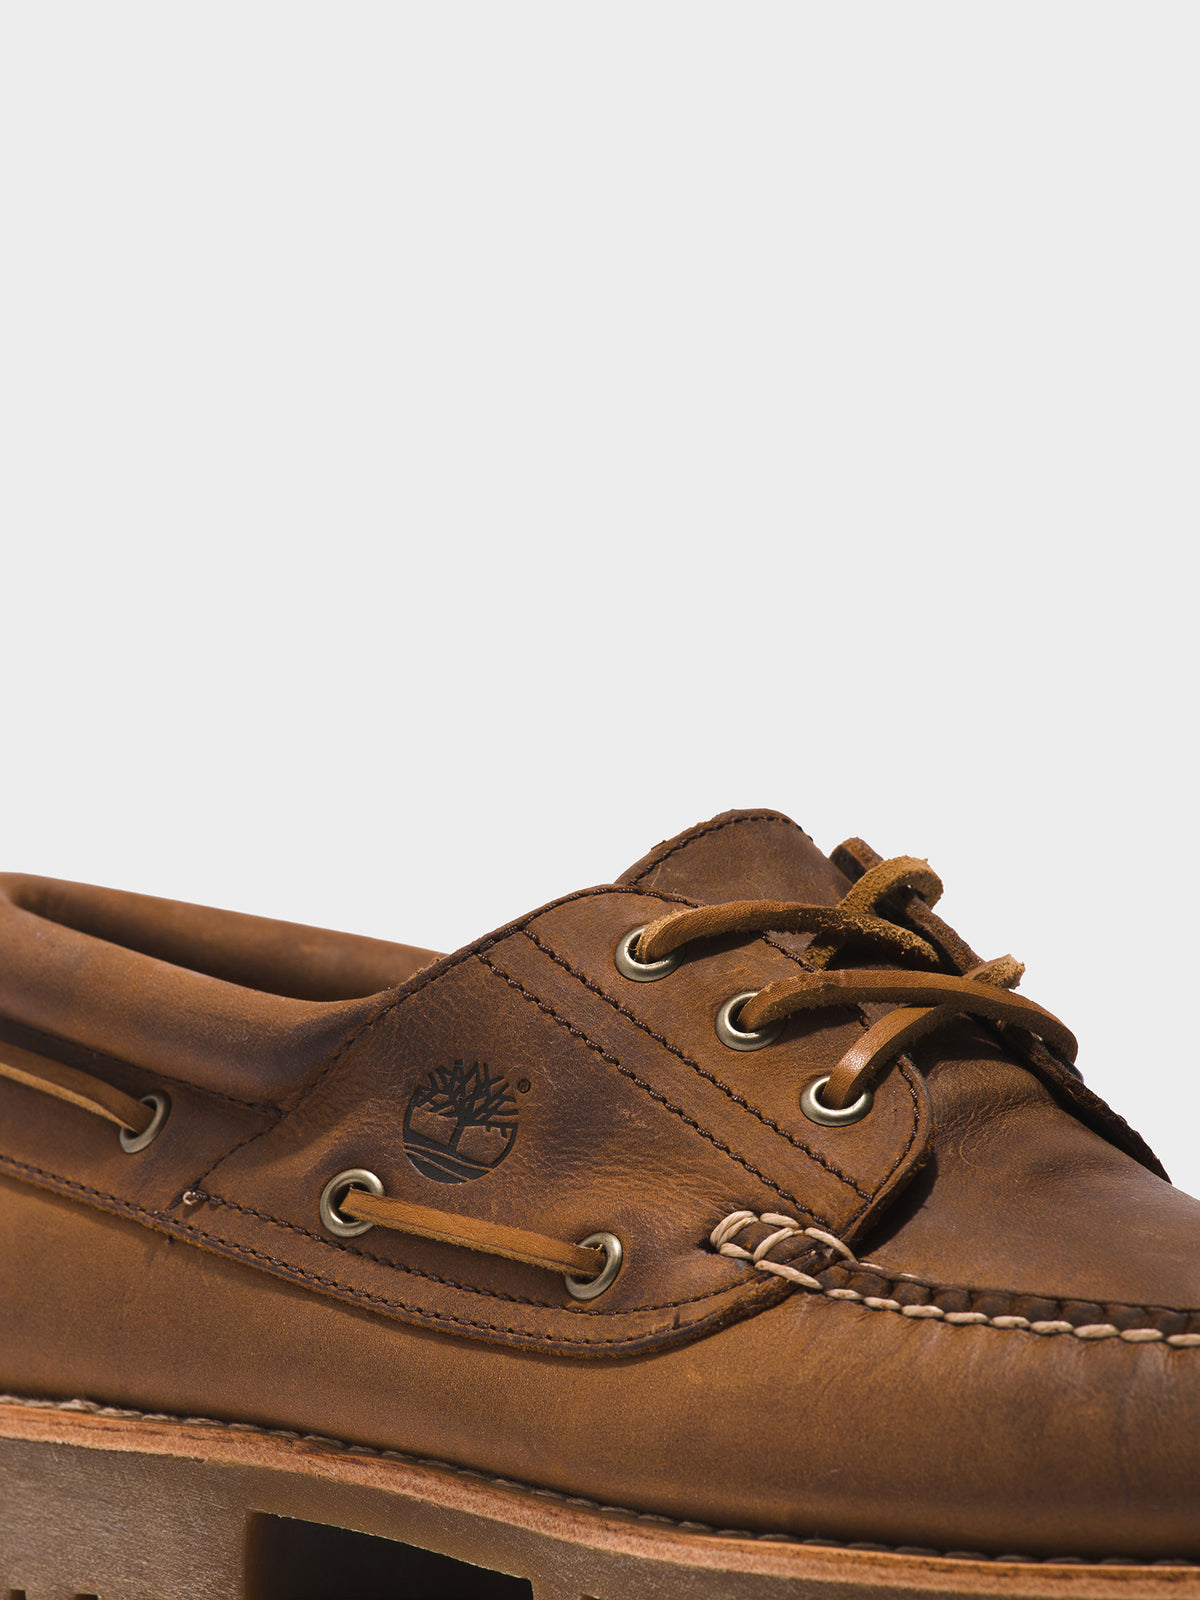 Mens 3 Eye Classic Lug Handsewn Boat Shoes in Brown